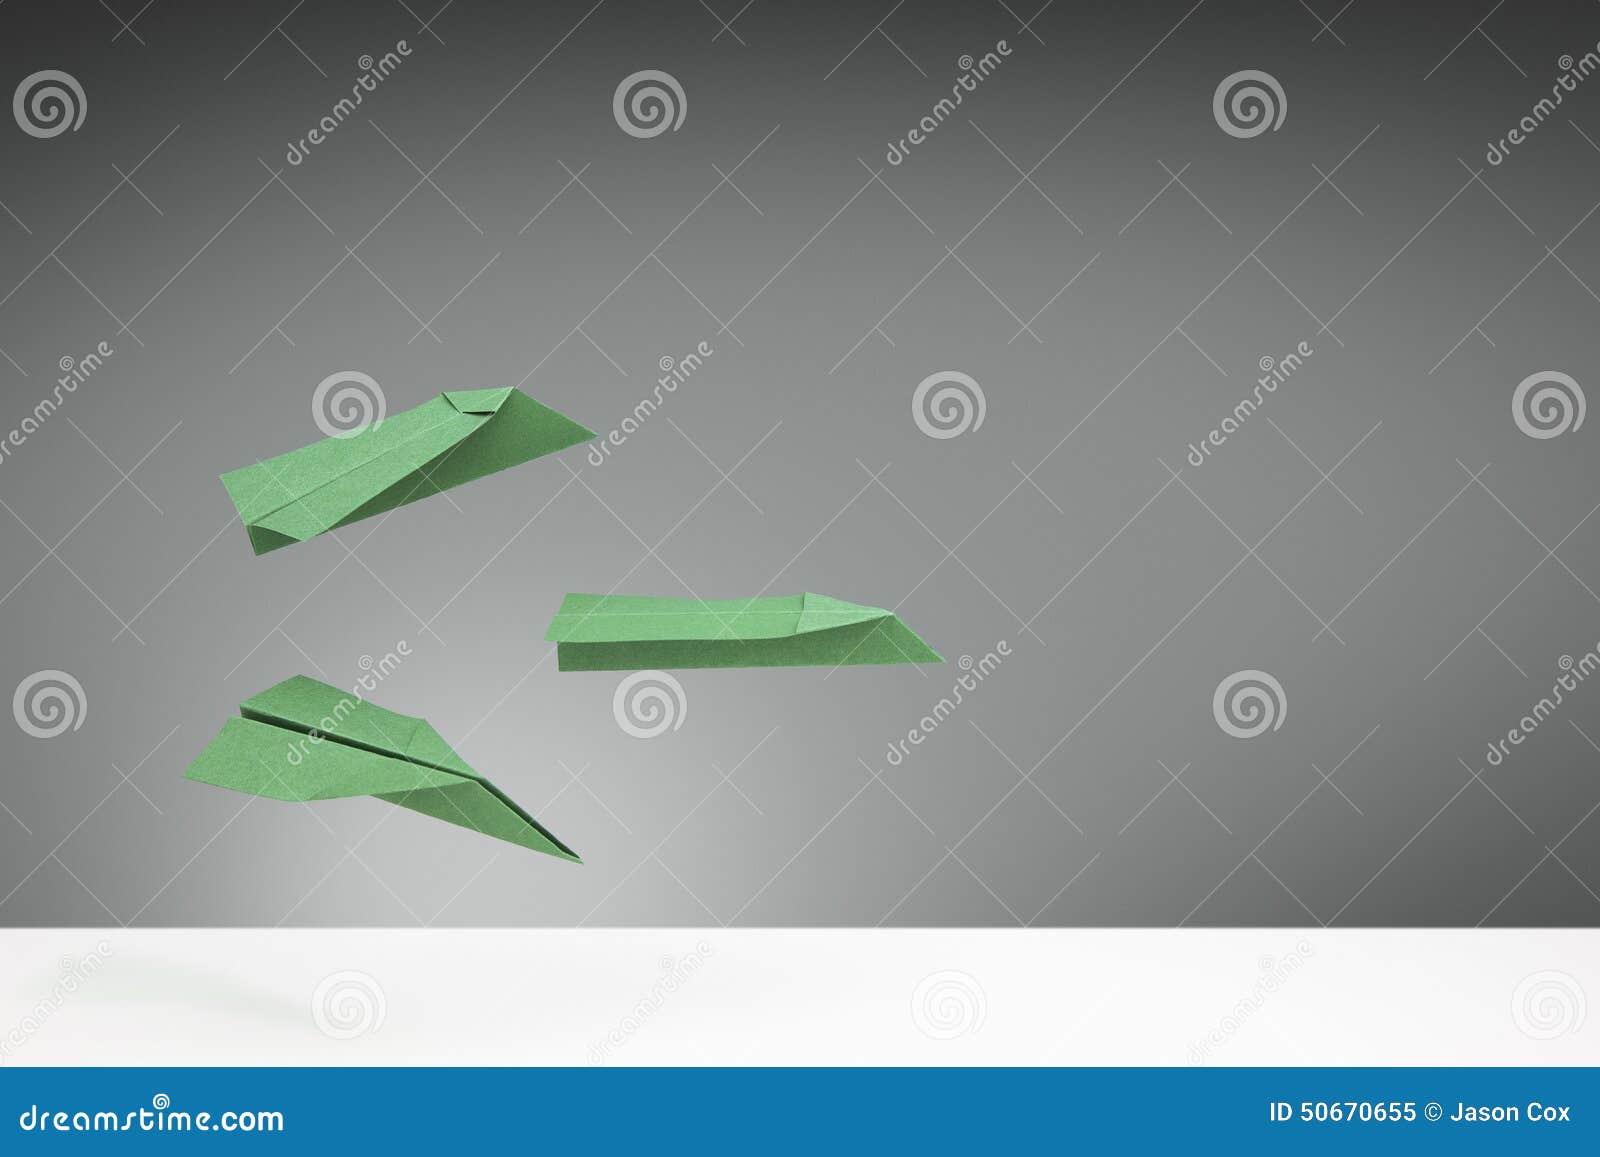 Green Paper airplanes stock image. Image of plane, green - 50670655